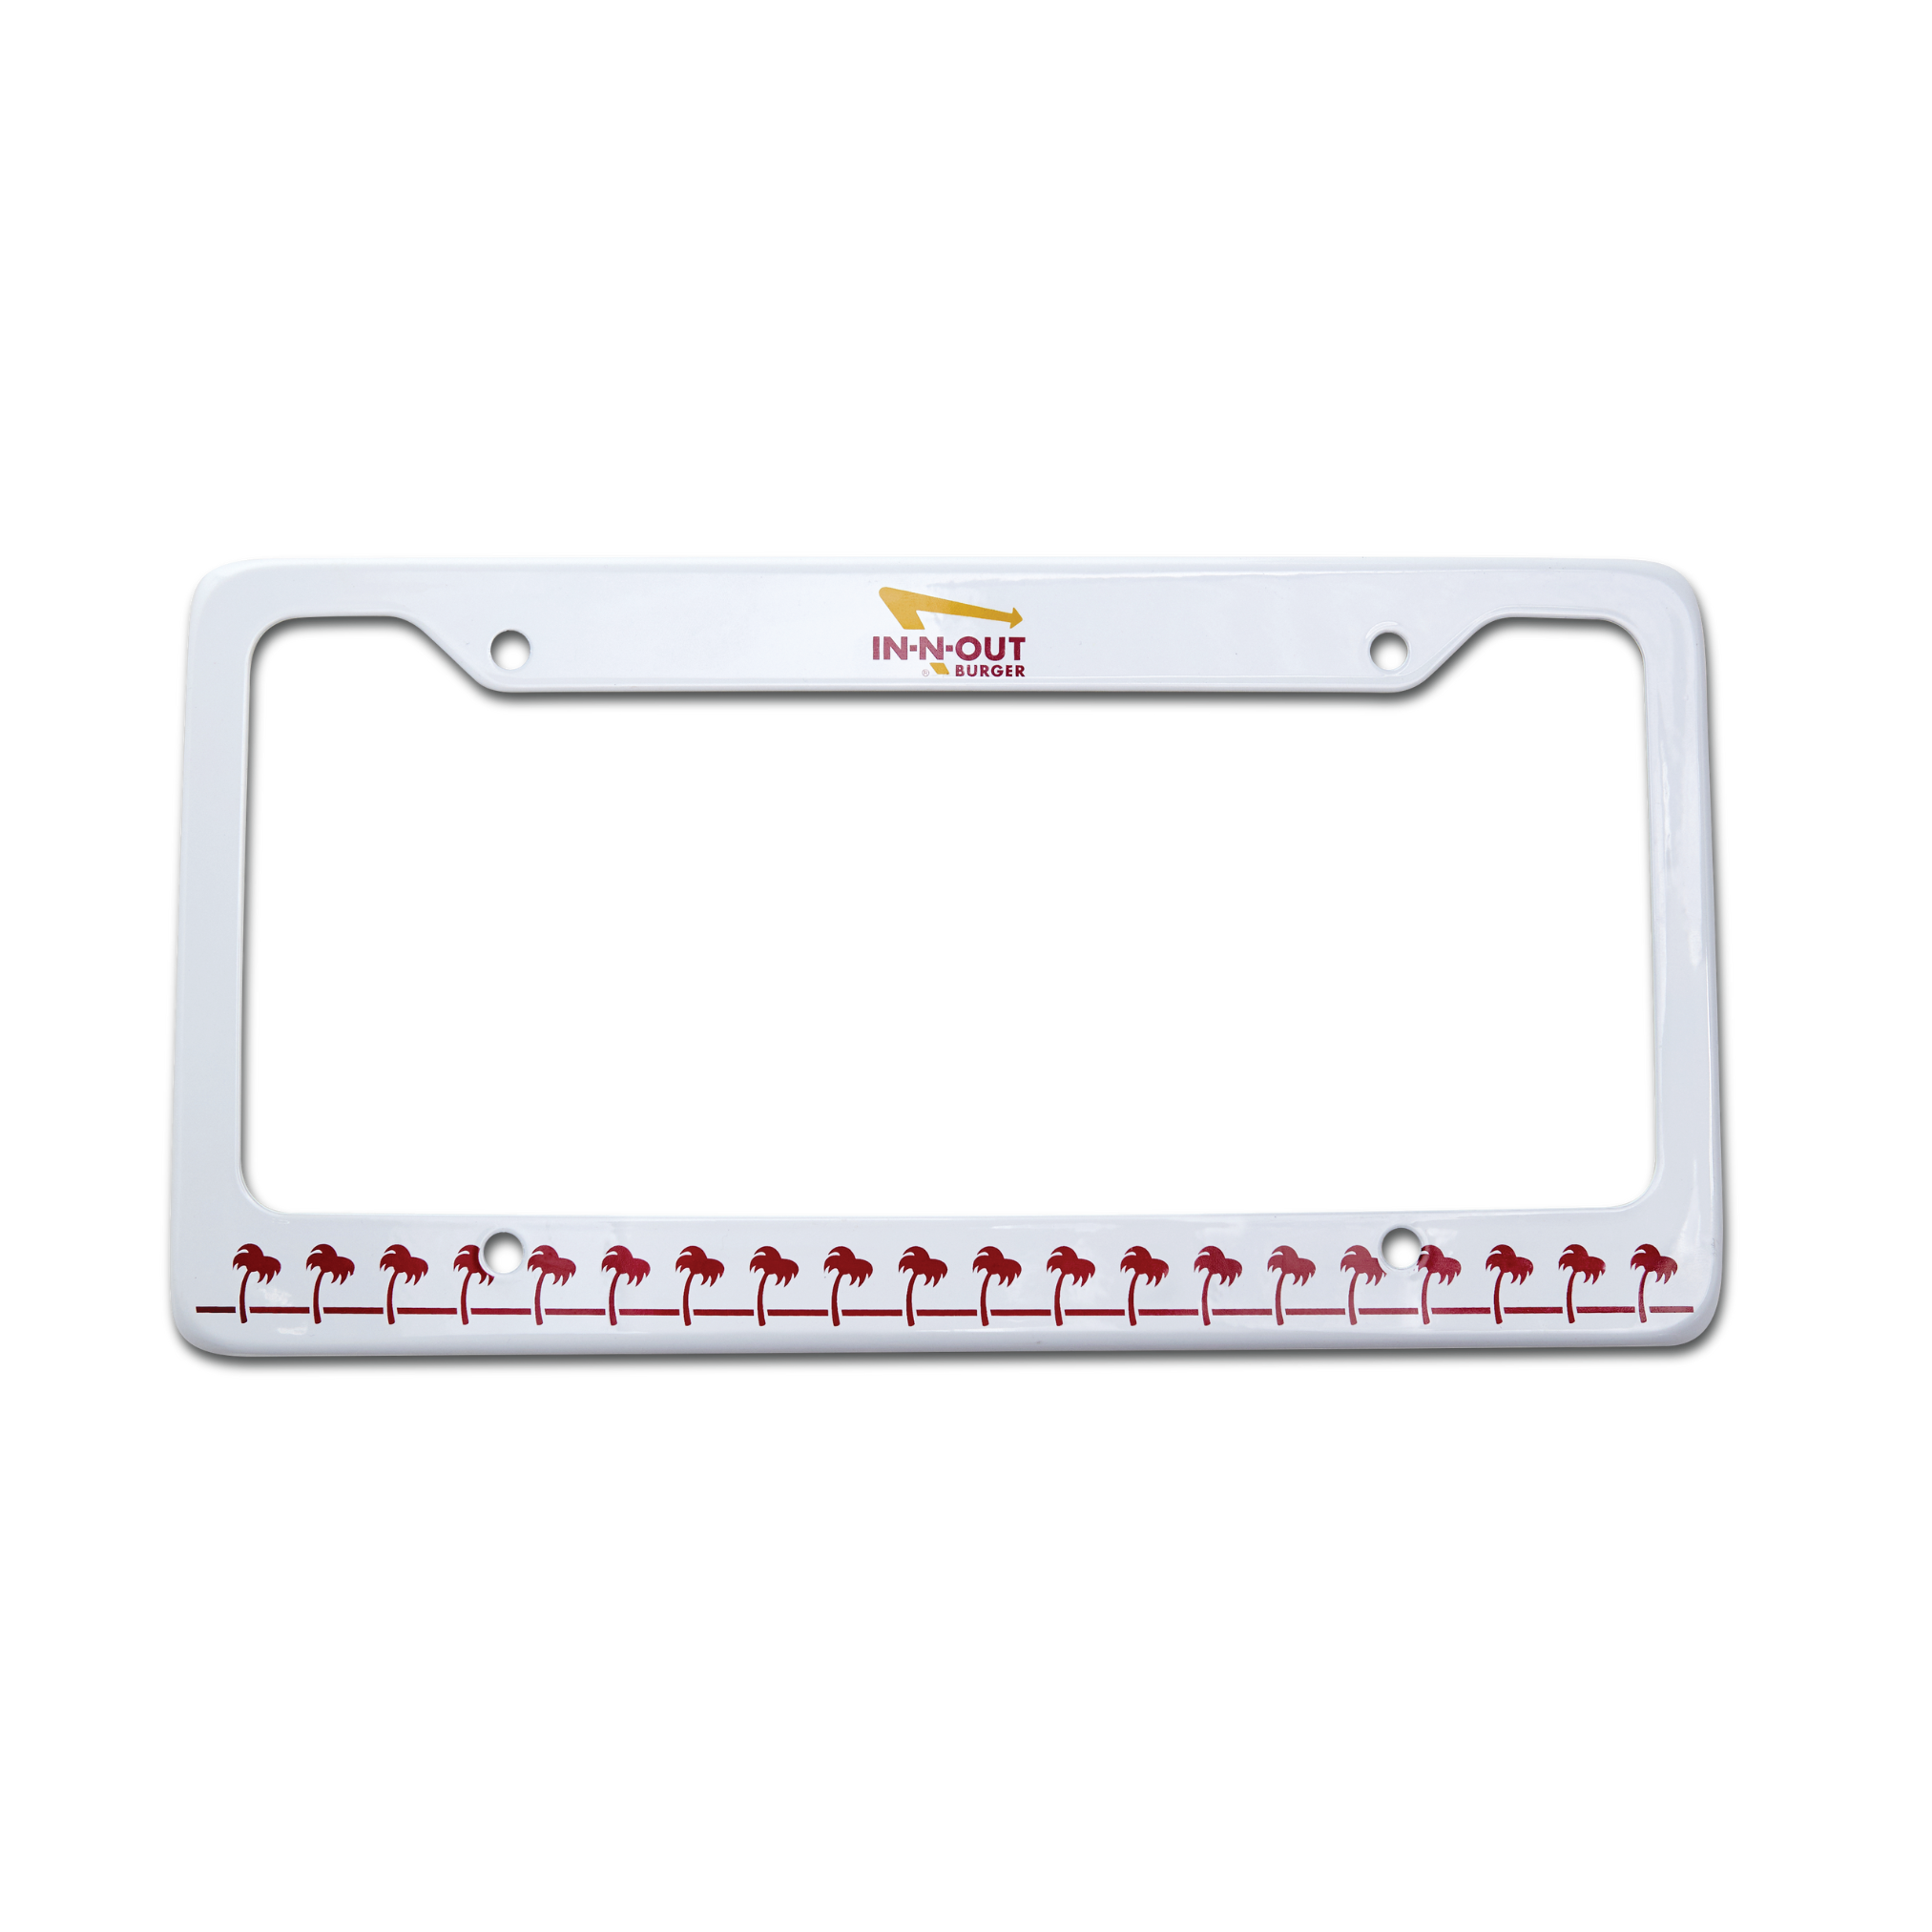 Drink Cup License Plate Frame – In-N-Out Burger Company Store